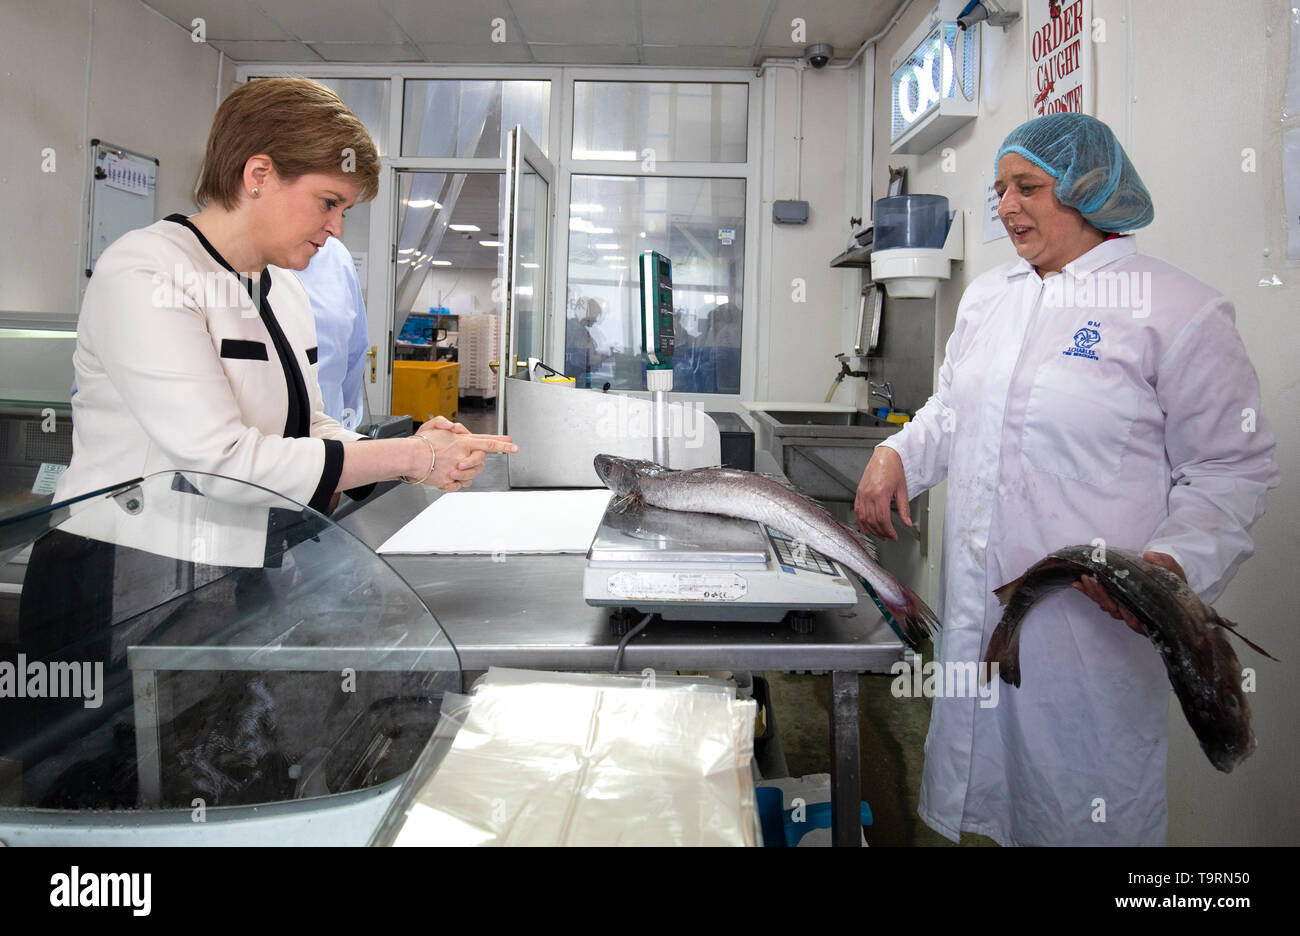 First Minister Nicola Sturgeon with fishmonger Sarah MacLeod during a visit with SNP European election candidate Christian Allard to J Charles Ltd seafood processing plant in Aberdeen. Christian Allard worked at J Charles Ltd for 25 years exporting seafood to the continent, before he entered politics. Stock Photo